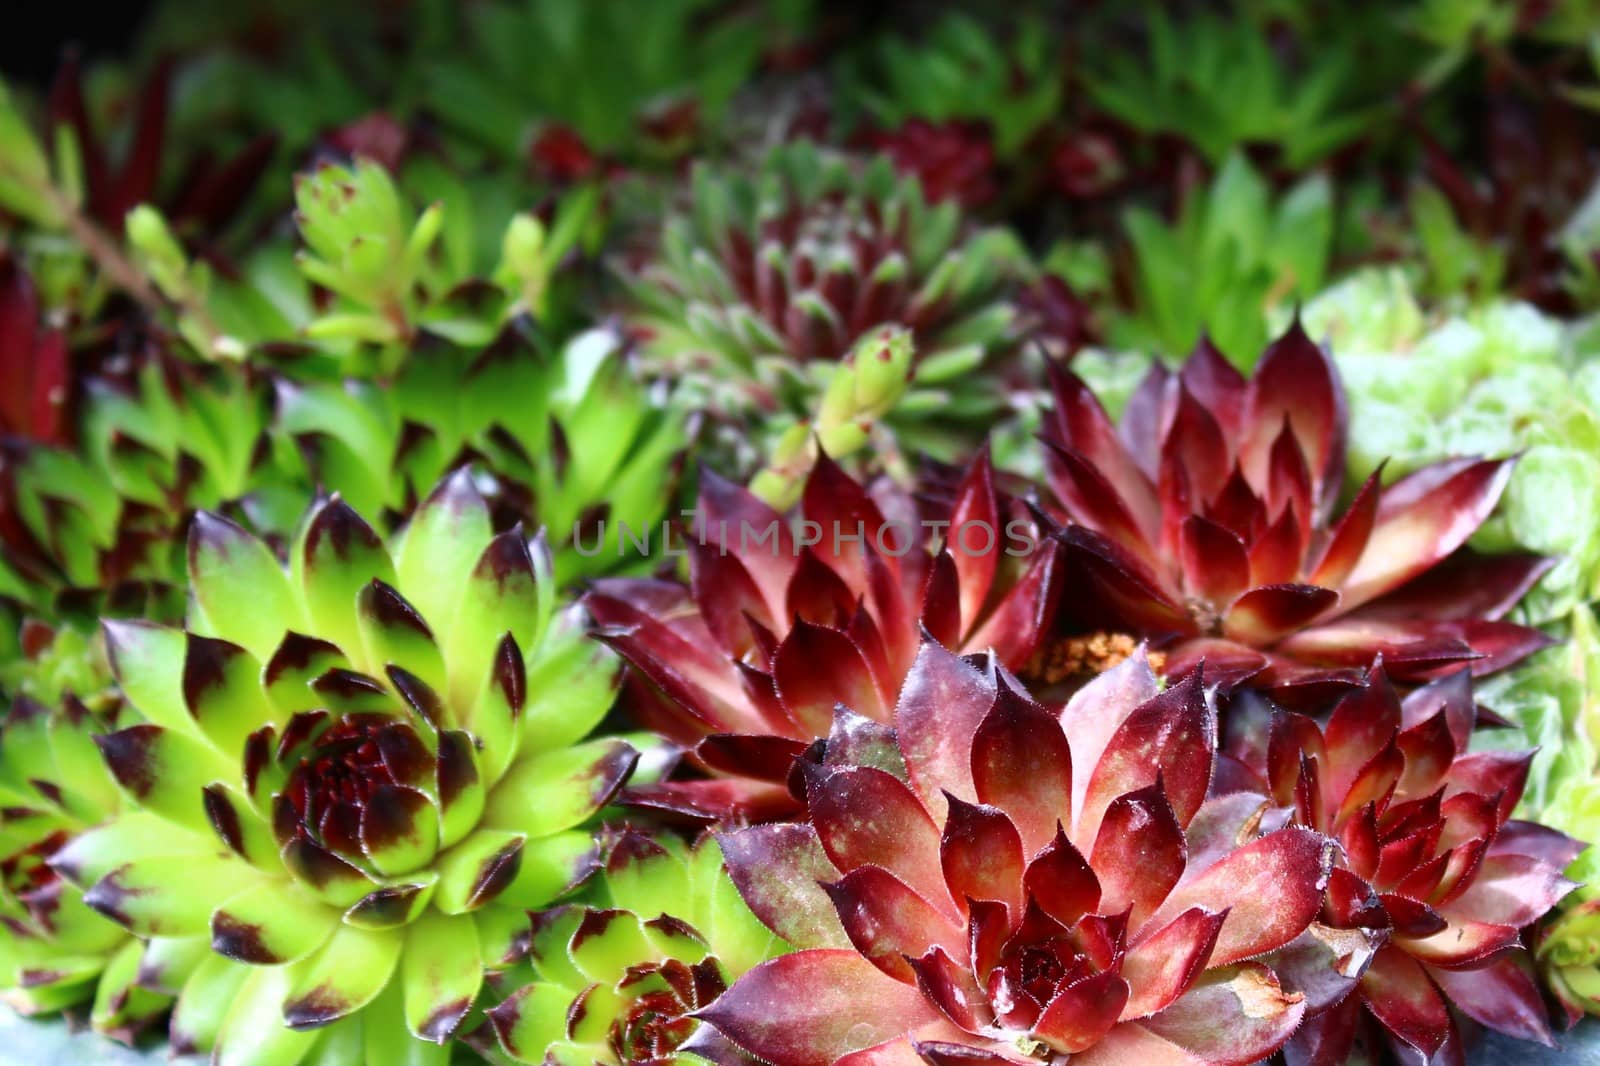 The picture shows colorful houseleek in the garden